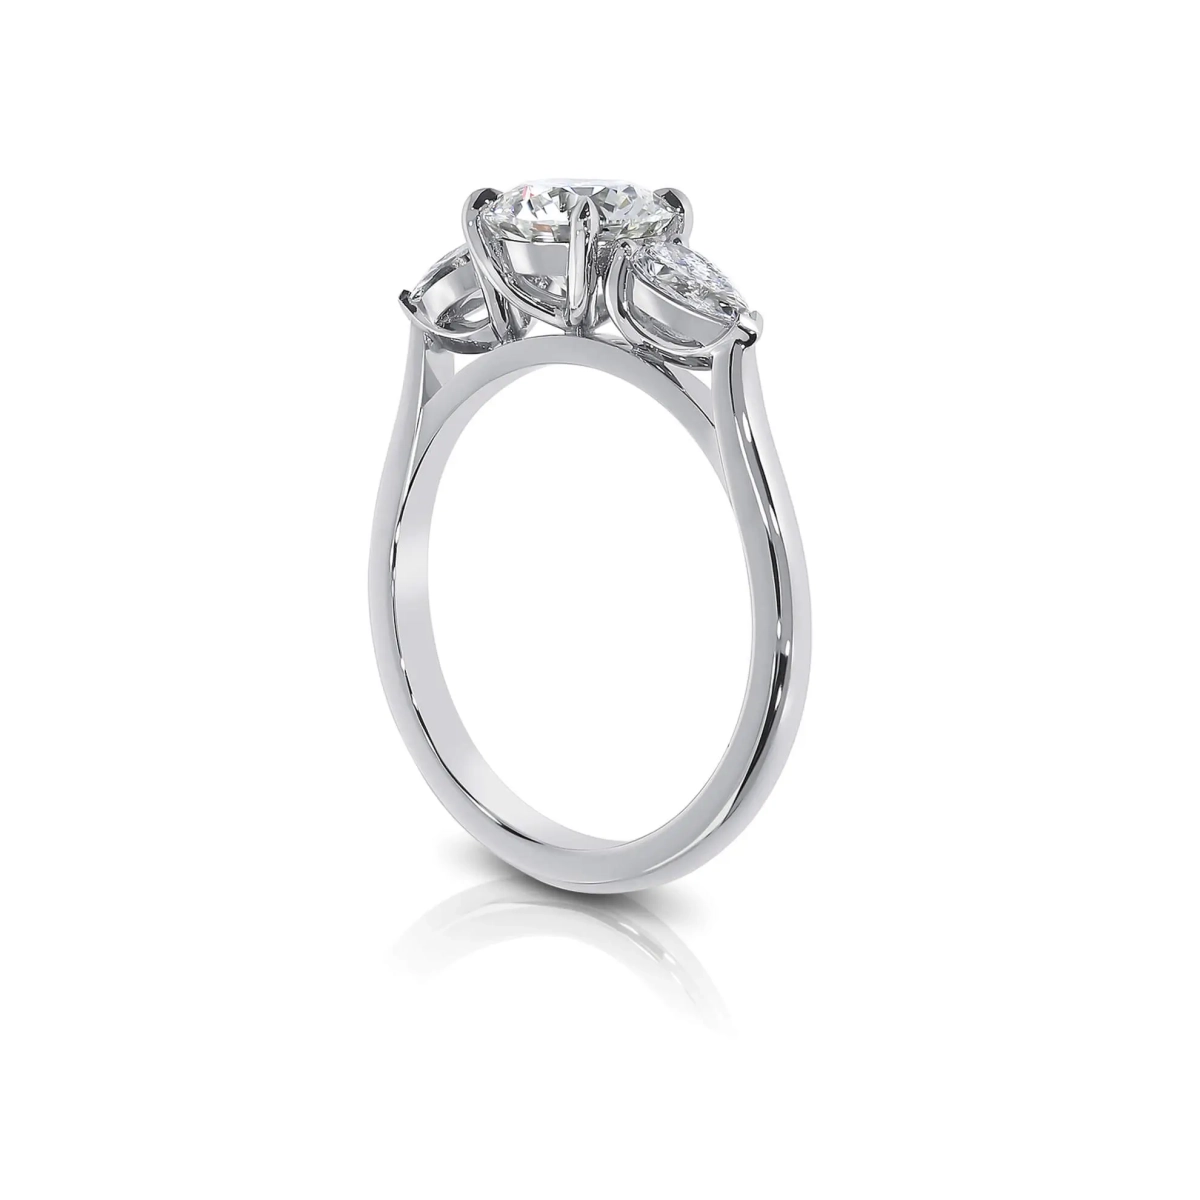 Round Diamond Trilogy Engagement Ring with Pear Shaped Side Stones